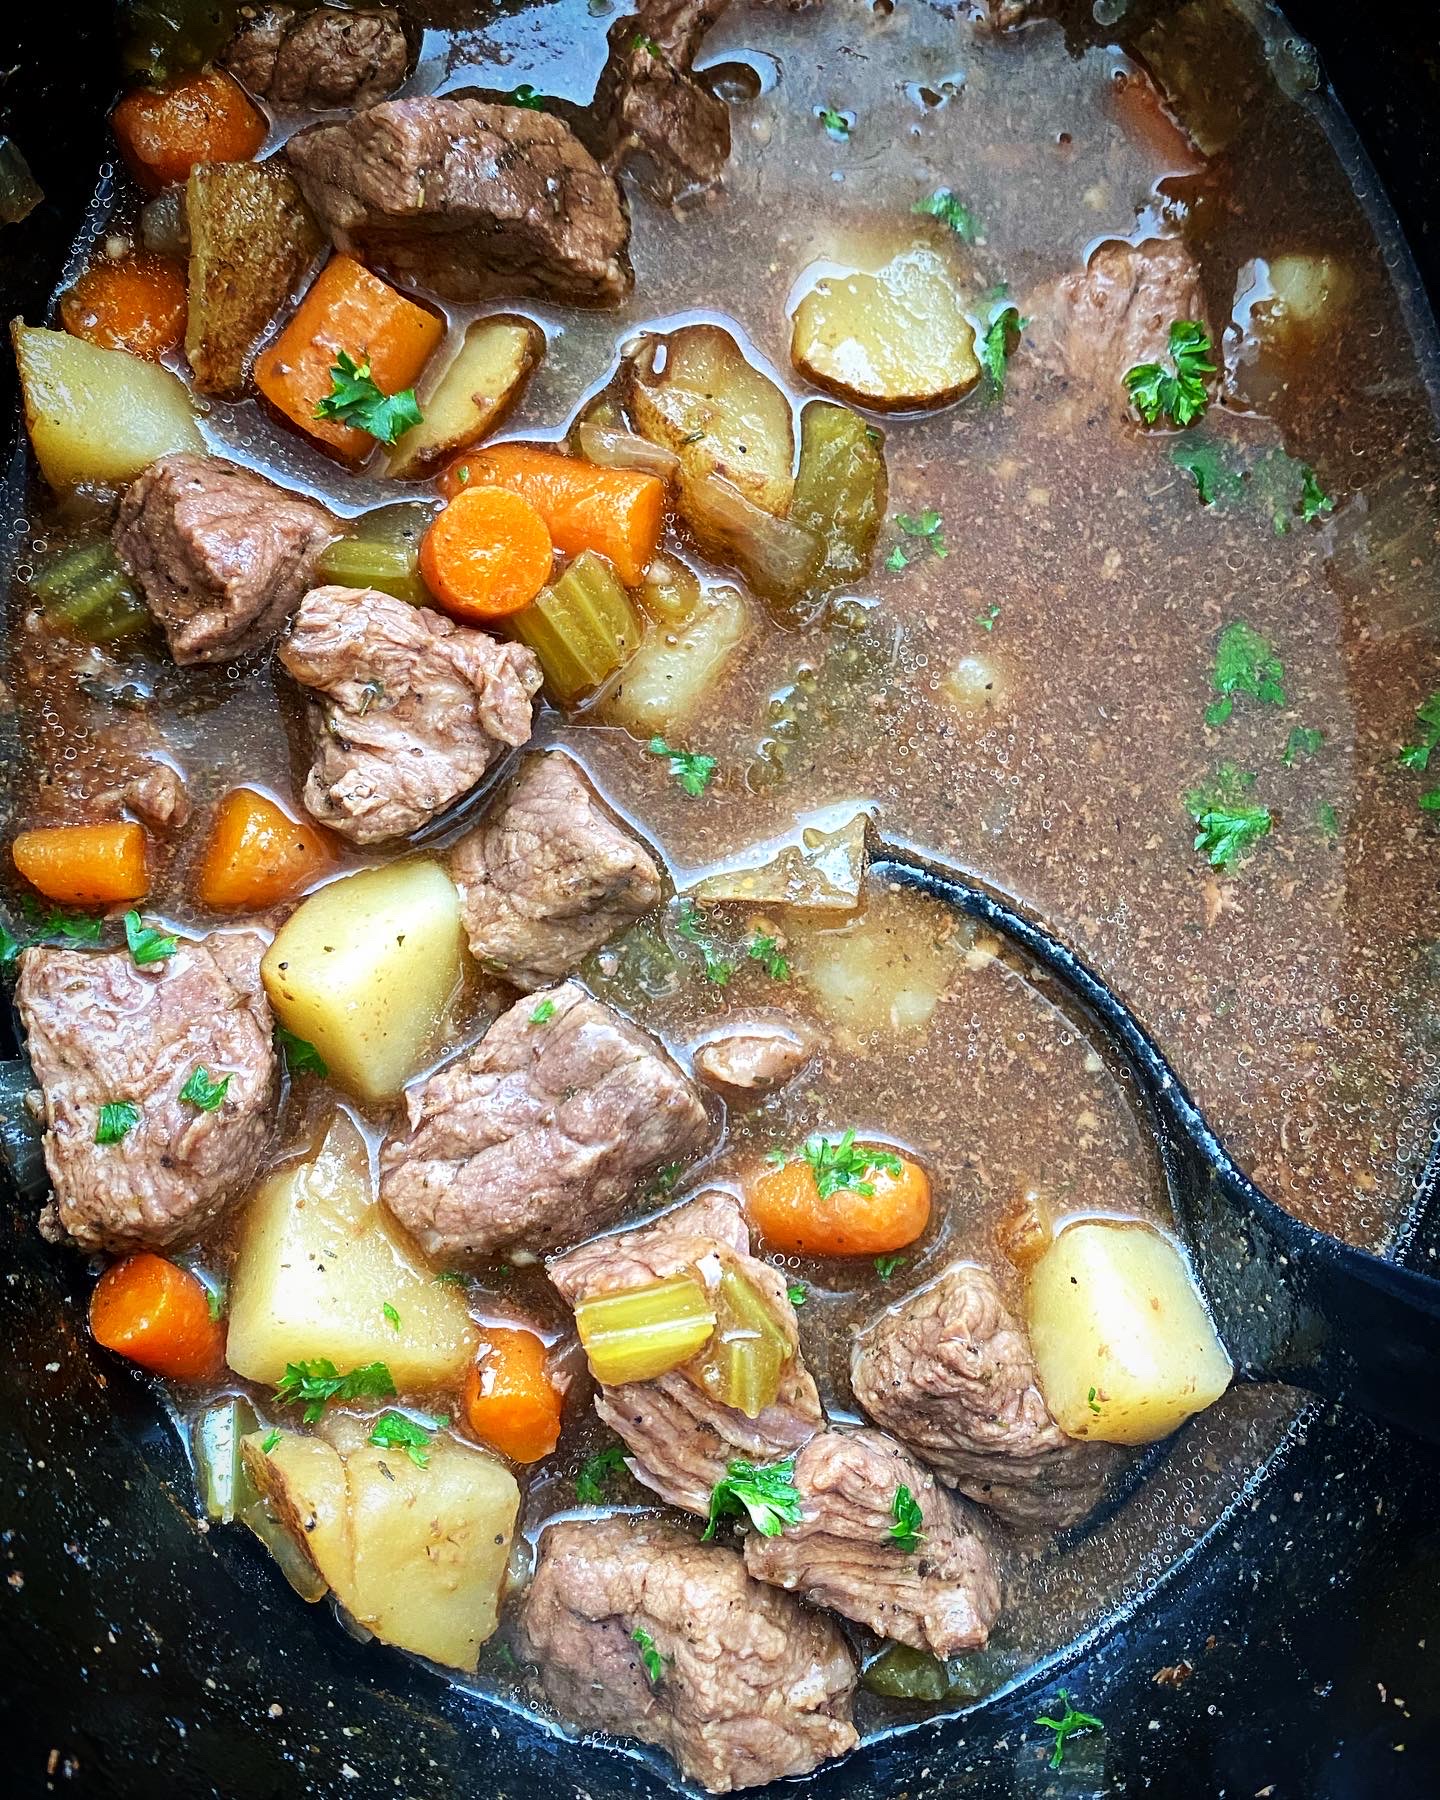 overhead shot of cooked Guinness beef stew in a black slow cooker